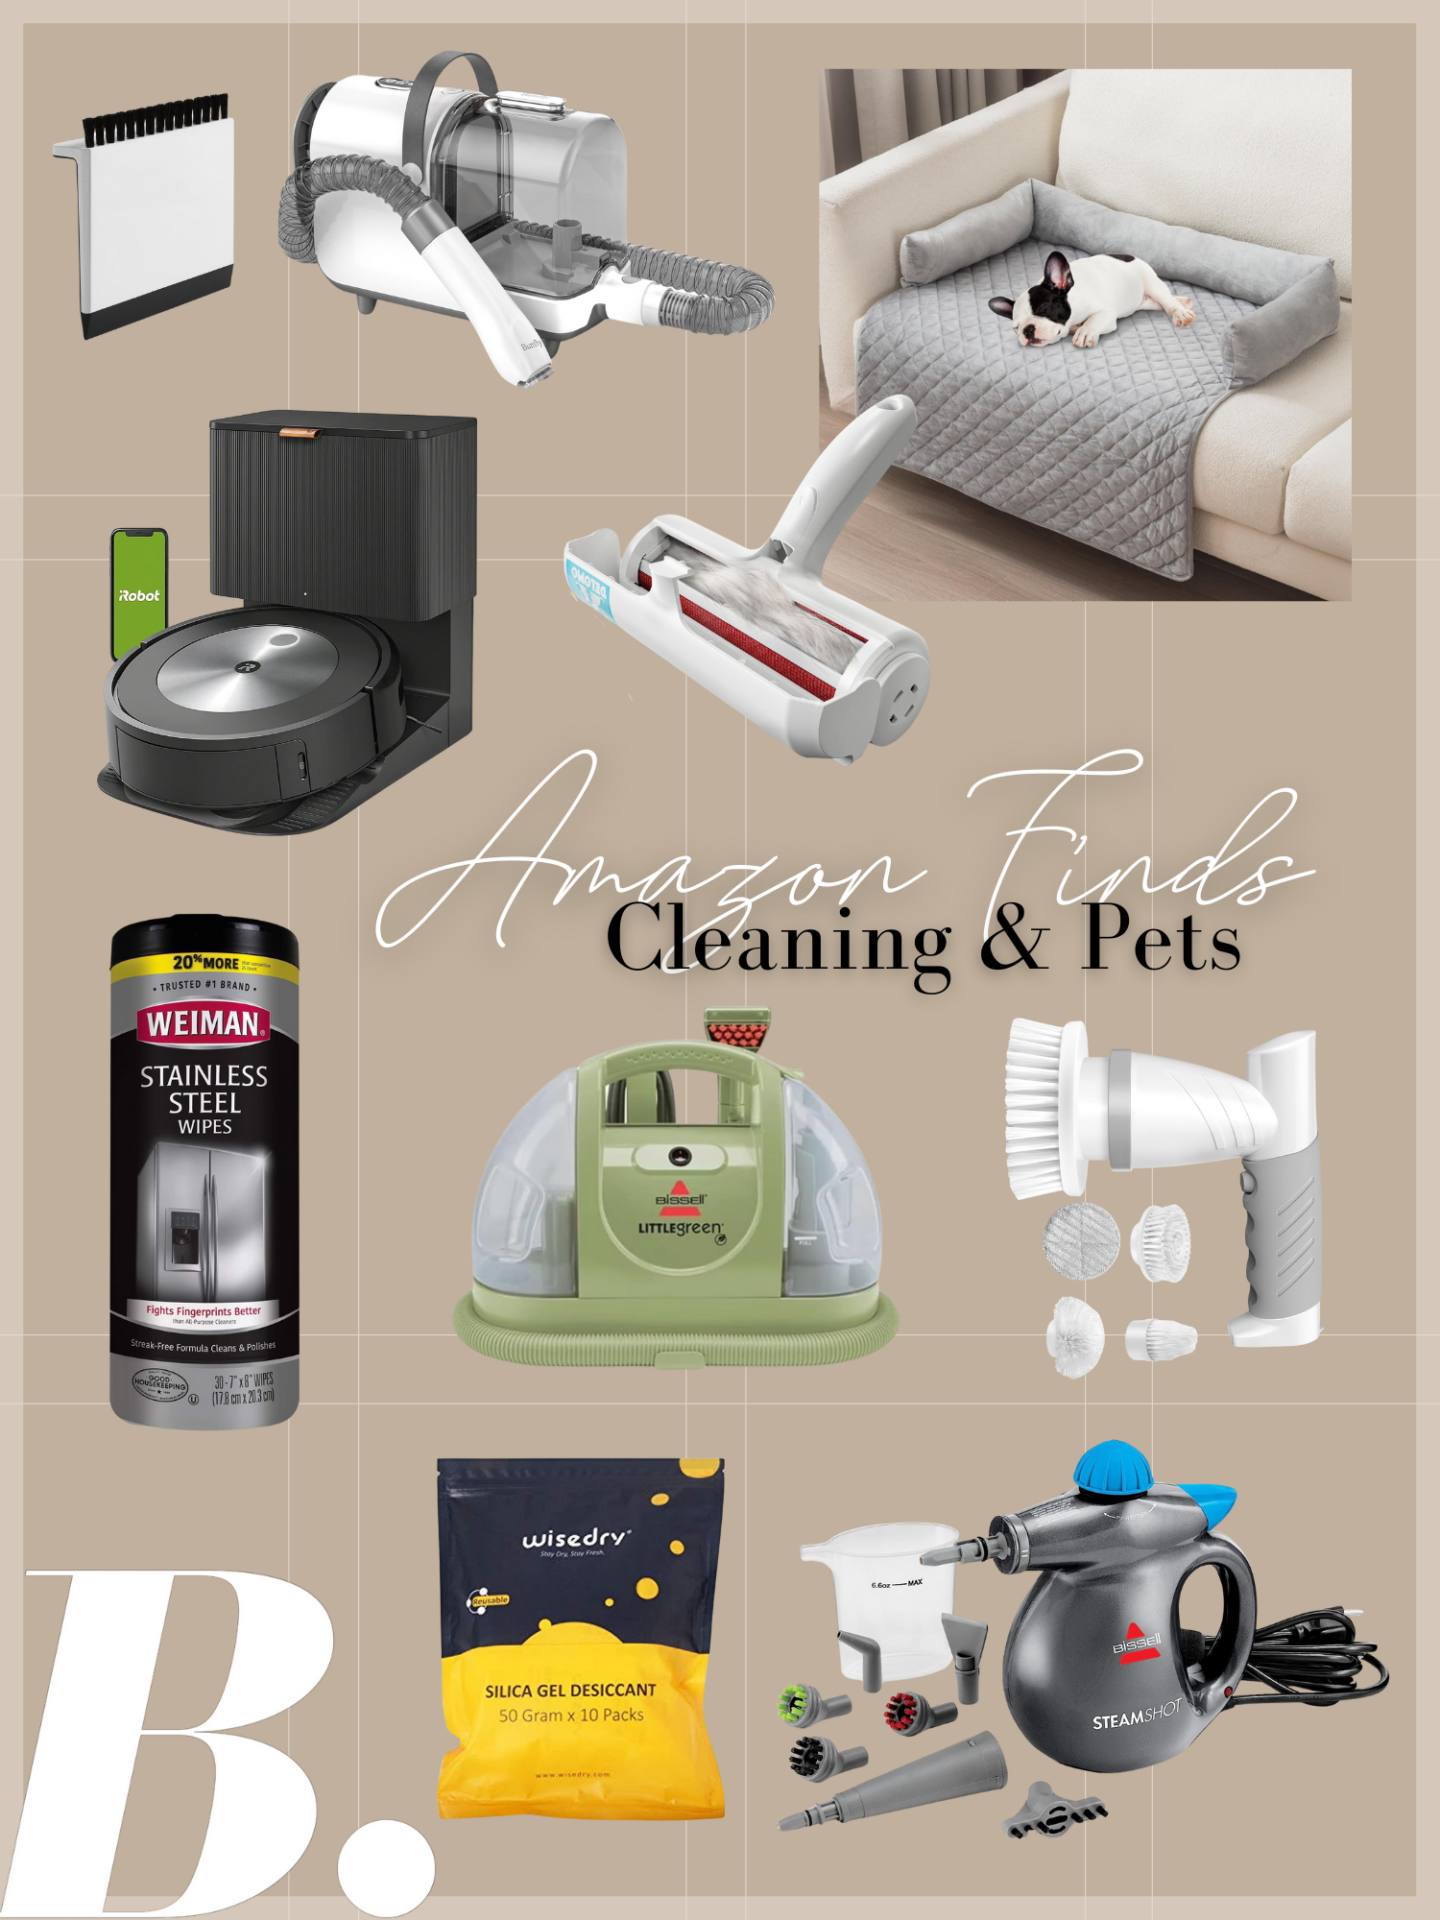 Cleaning & Pets products